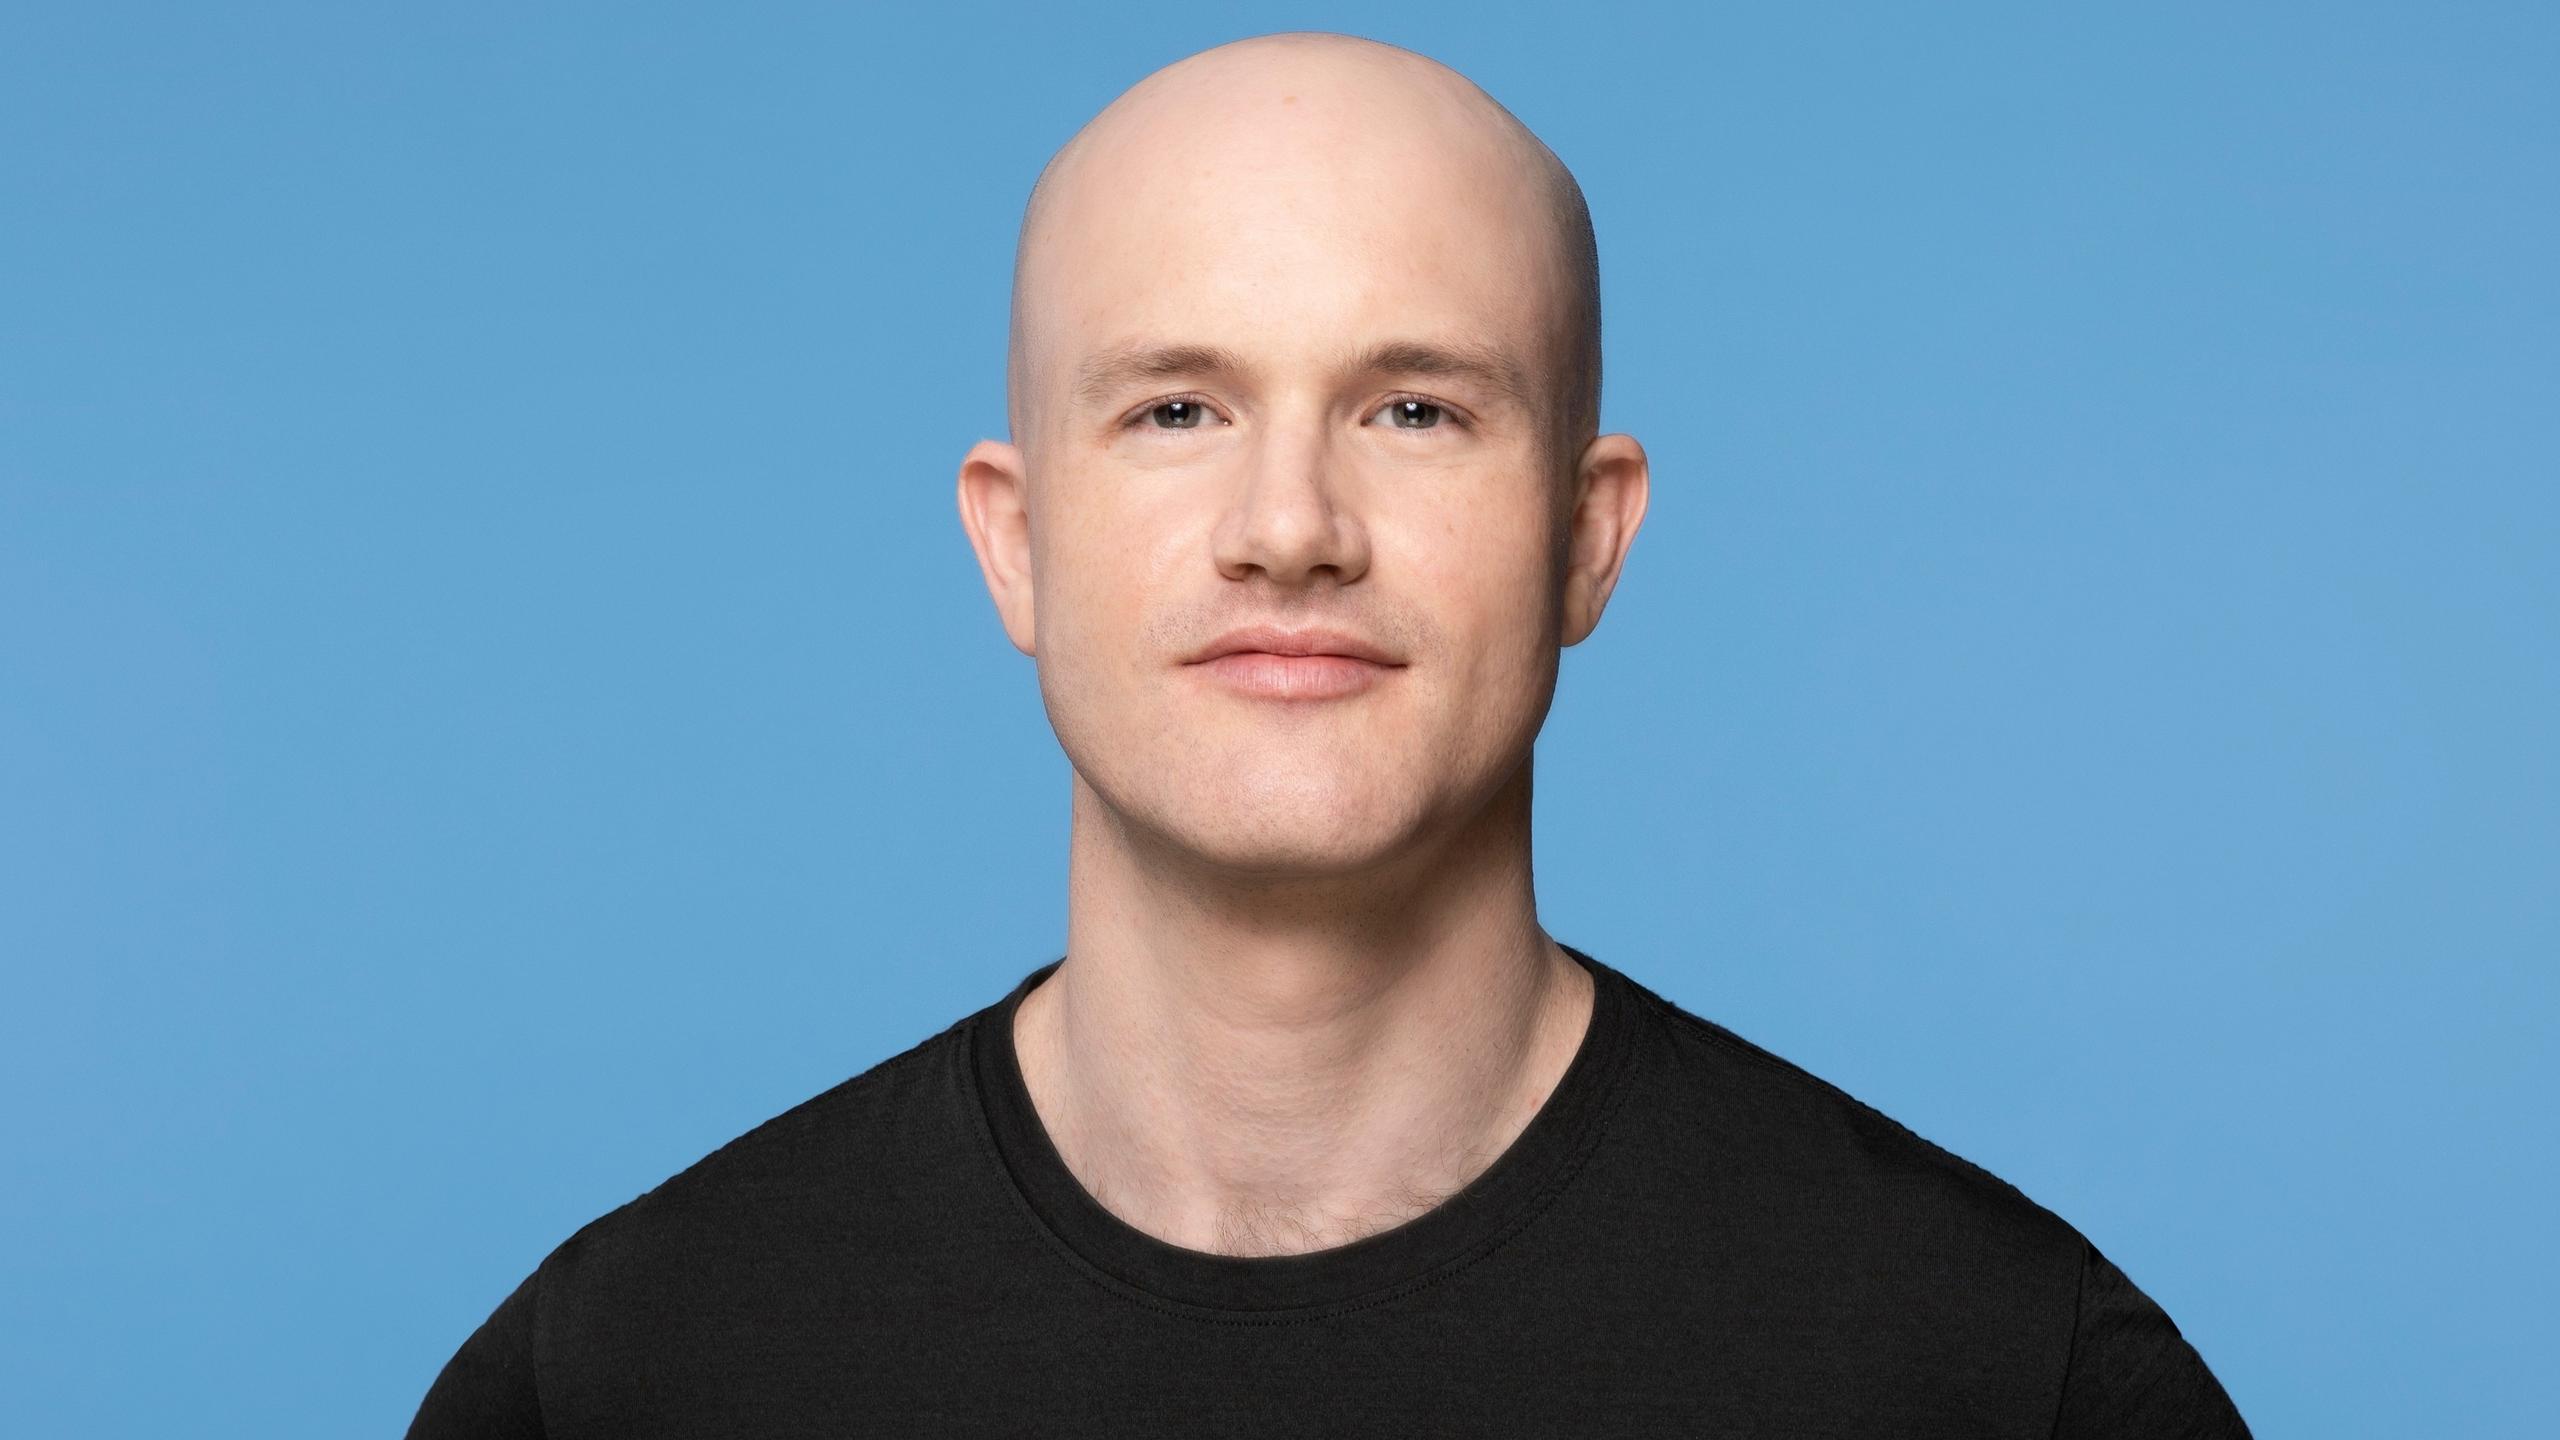 Coinbase CEO Brian Armstrong: "AI is one of those really important technology trends the US needs to get right along with crypto"